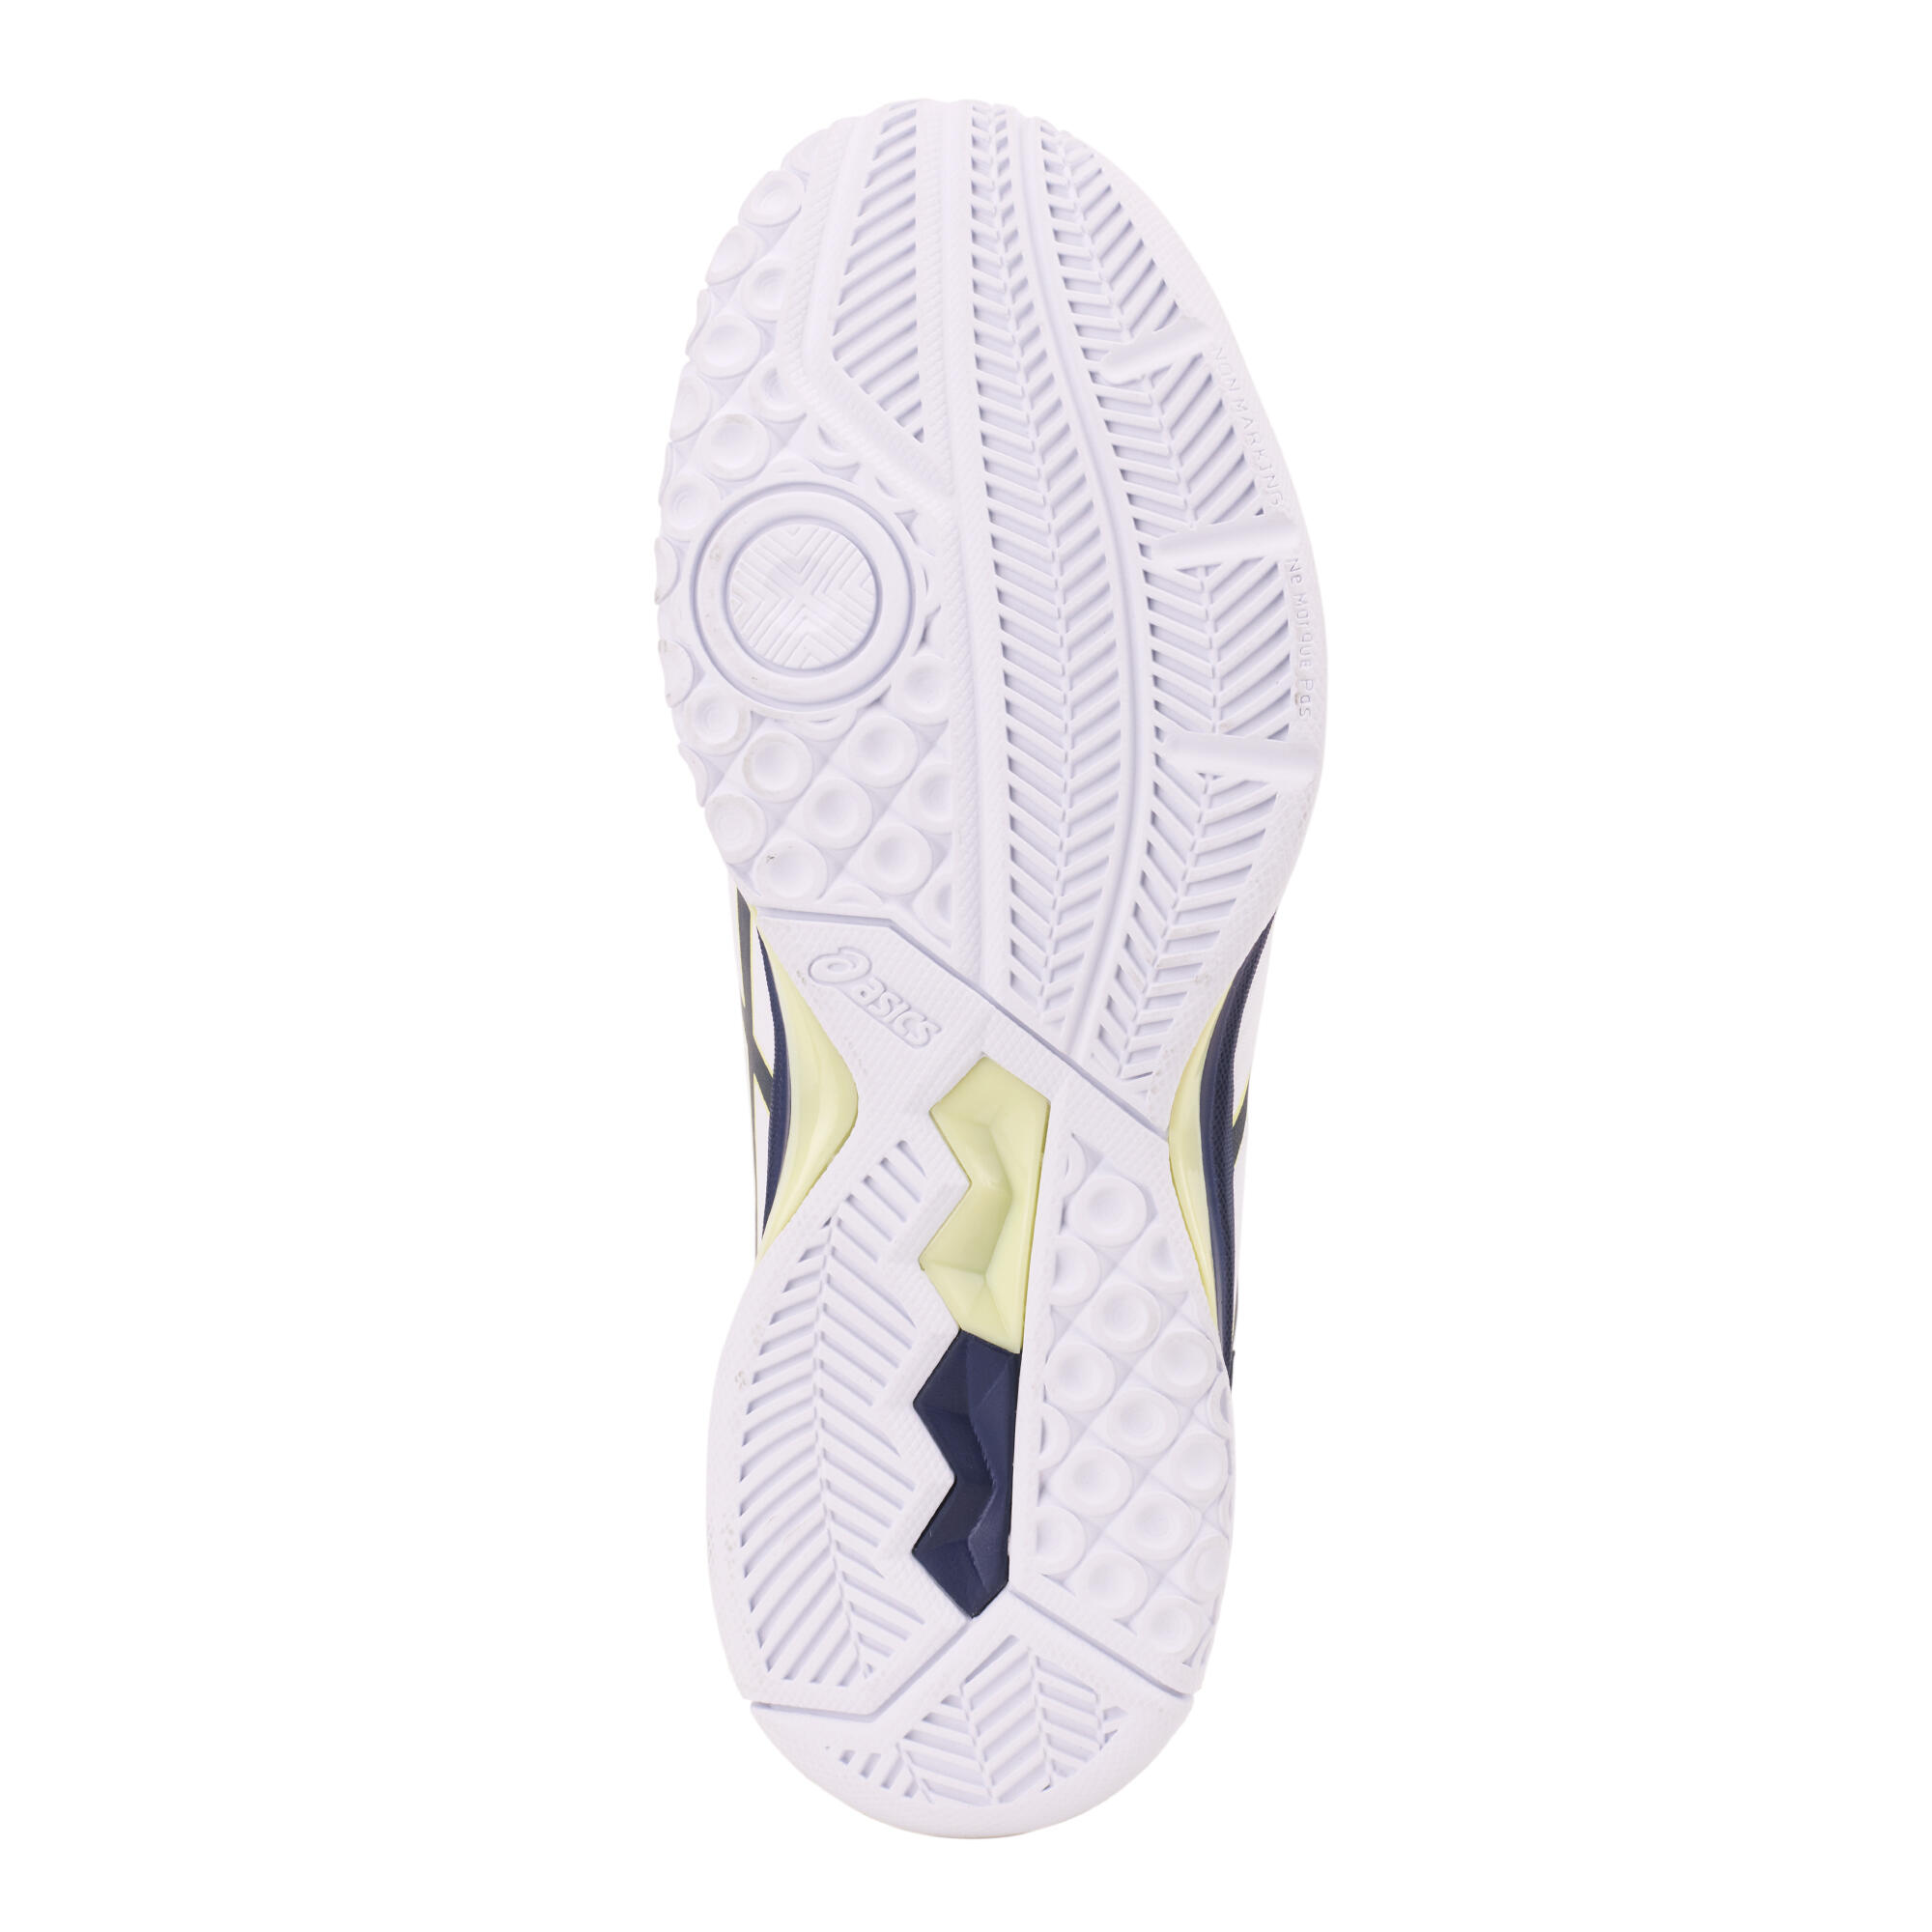 Men's Volleyball Shoes Gel Spike 4 - White/Blue/Yellow 6/6